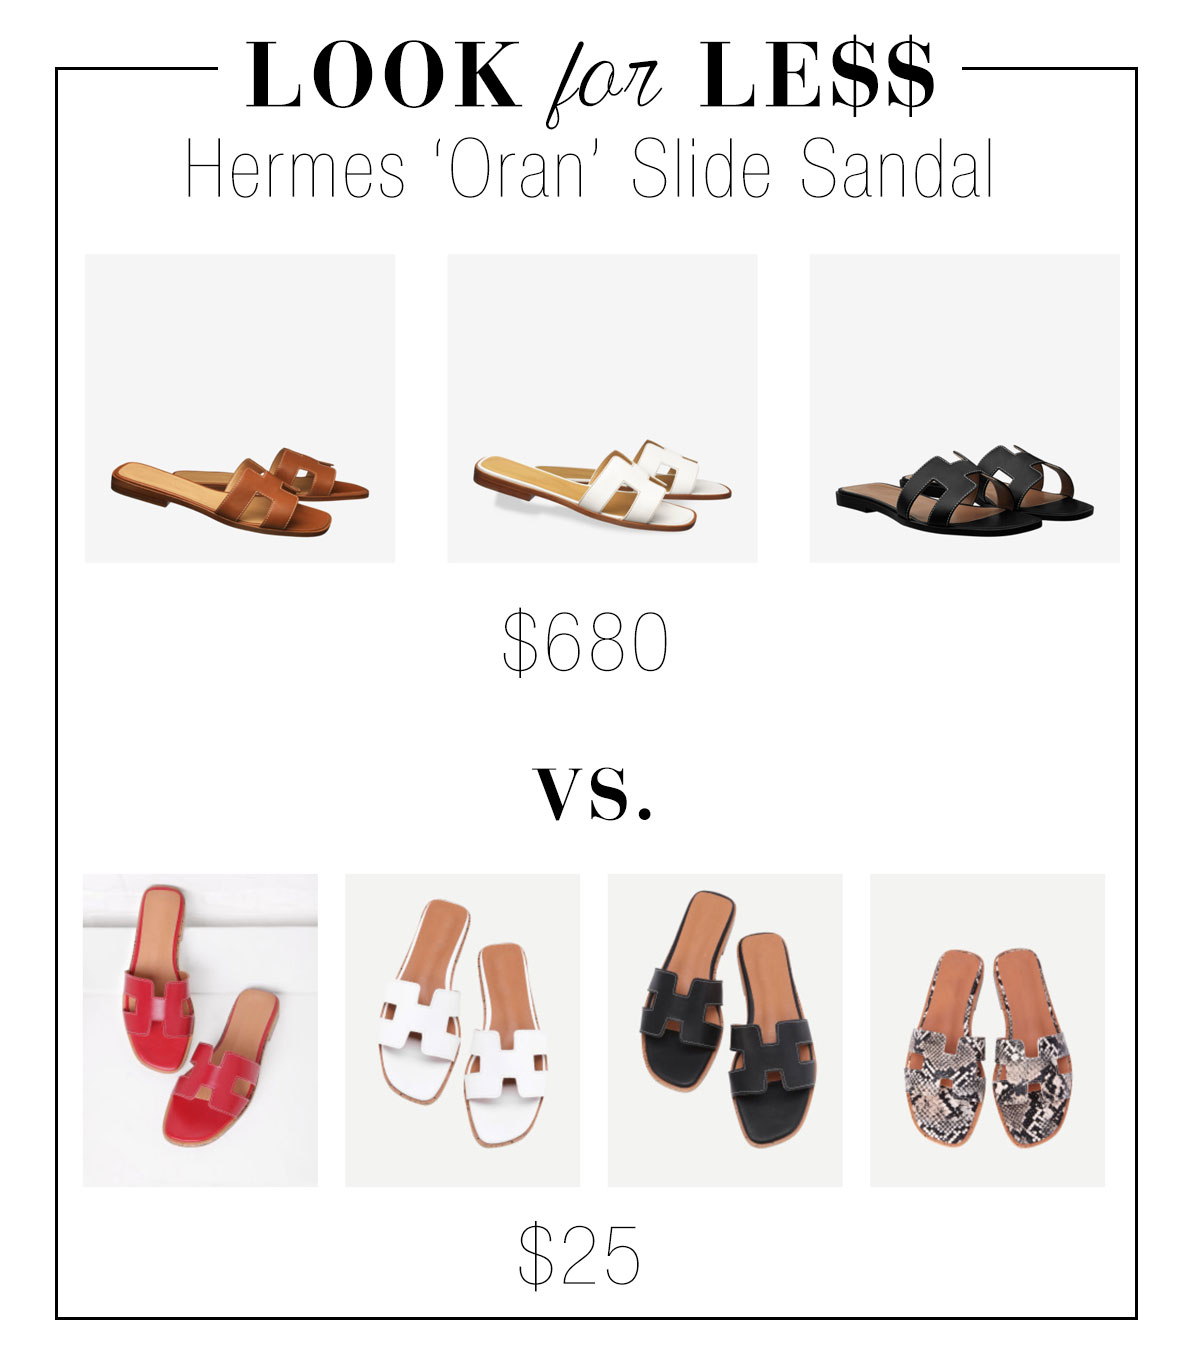 Get the Hermes look for less